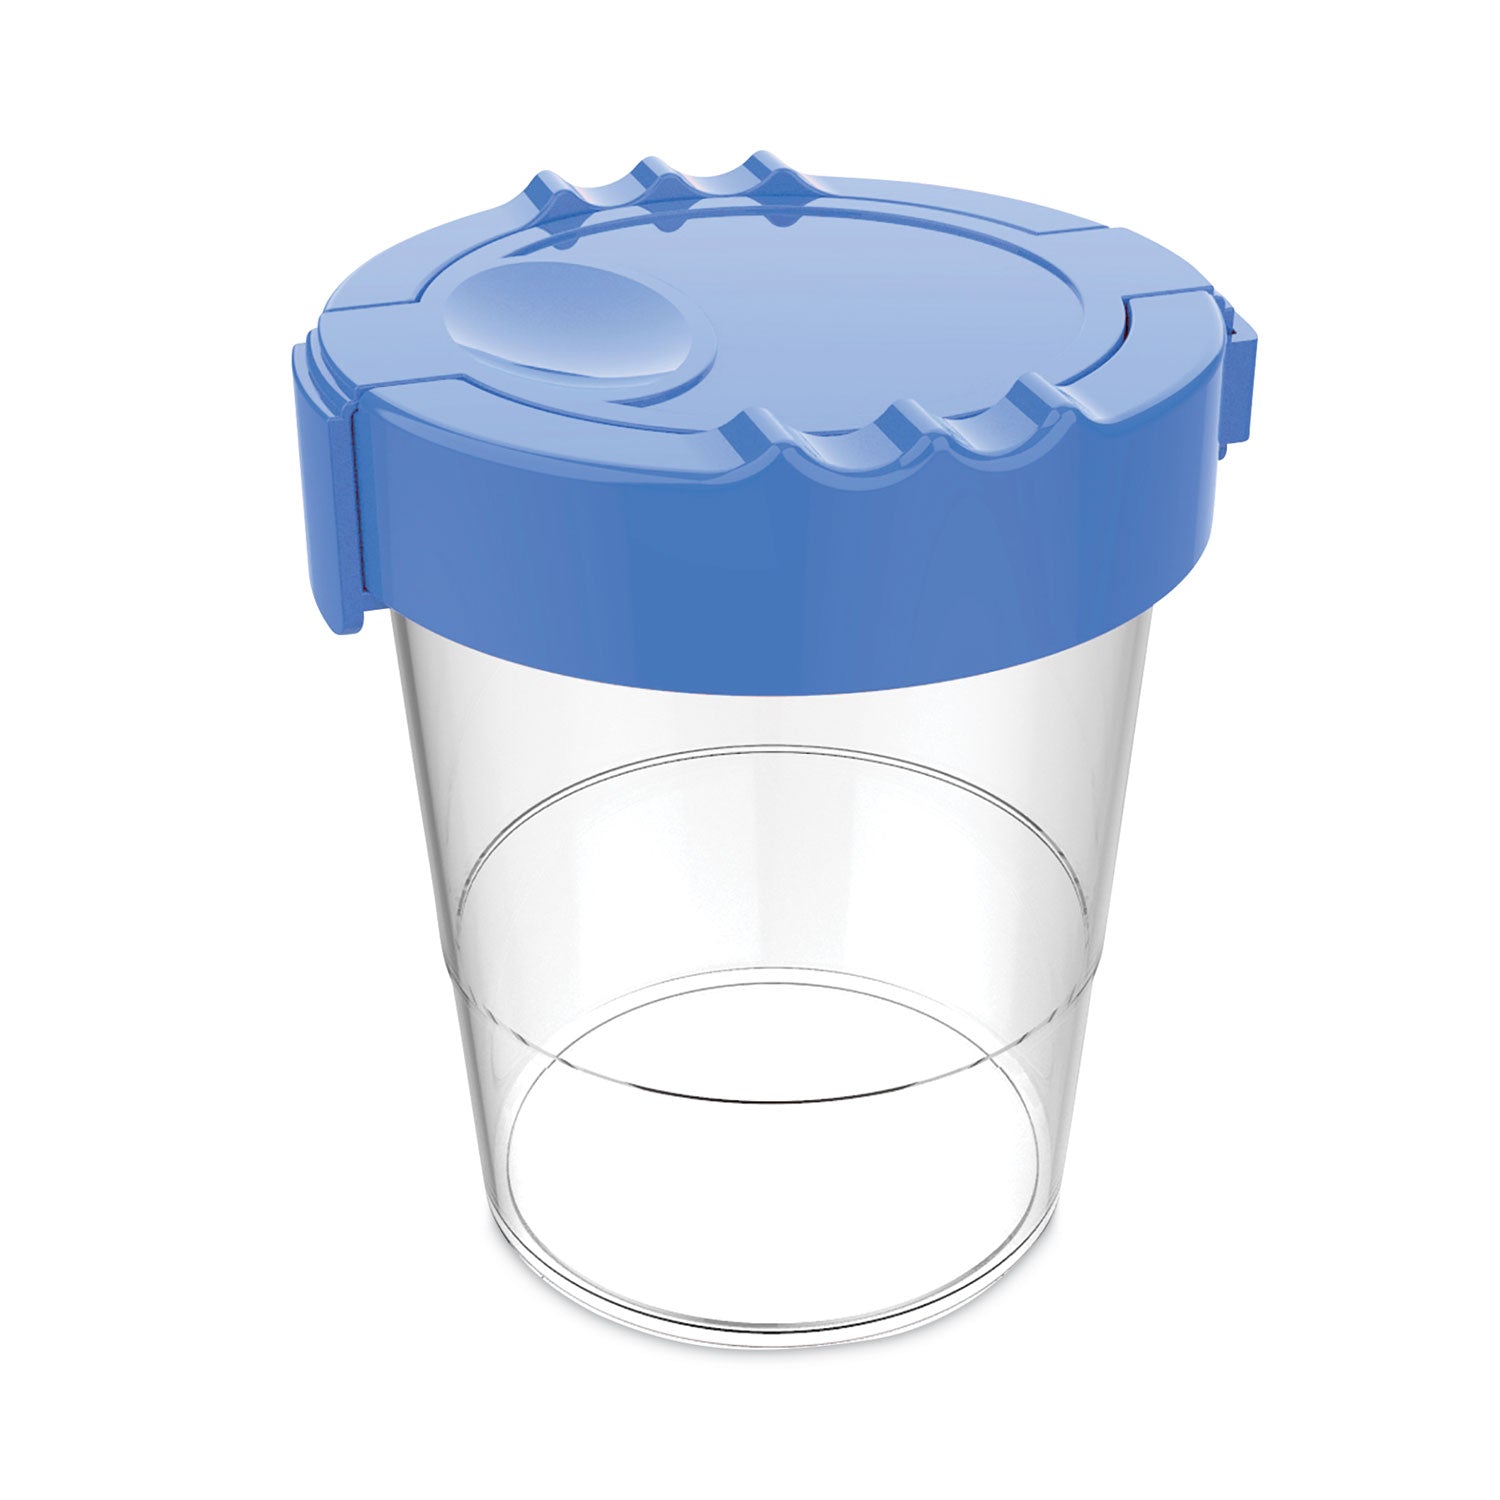 antimicrobial-no-spill-paint-cup-346-w-x-393-h-blue_def39515blu - 1